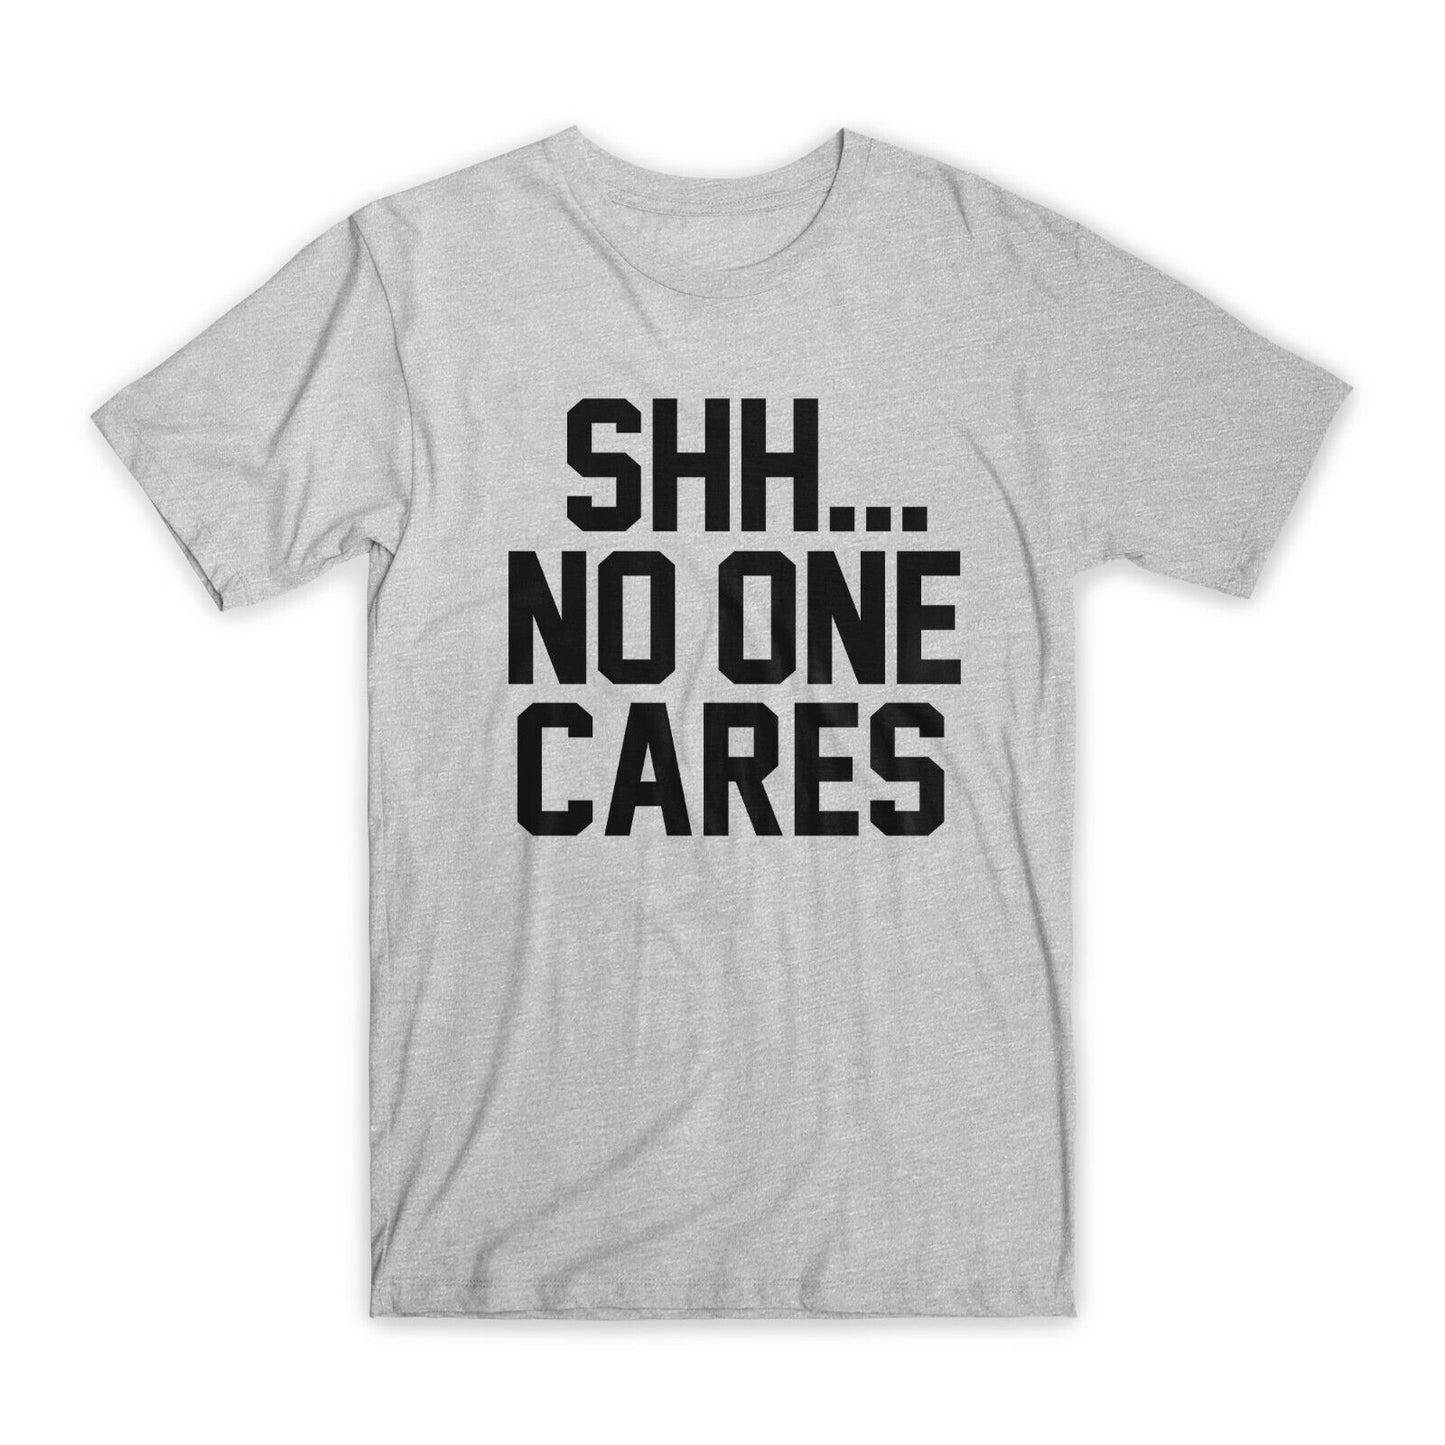 Shh... No One Cares T-Shirt Premium Soft Cotton Crew Neck Funny Tees Gifts NEW